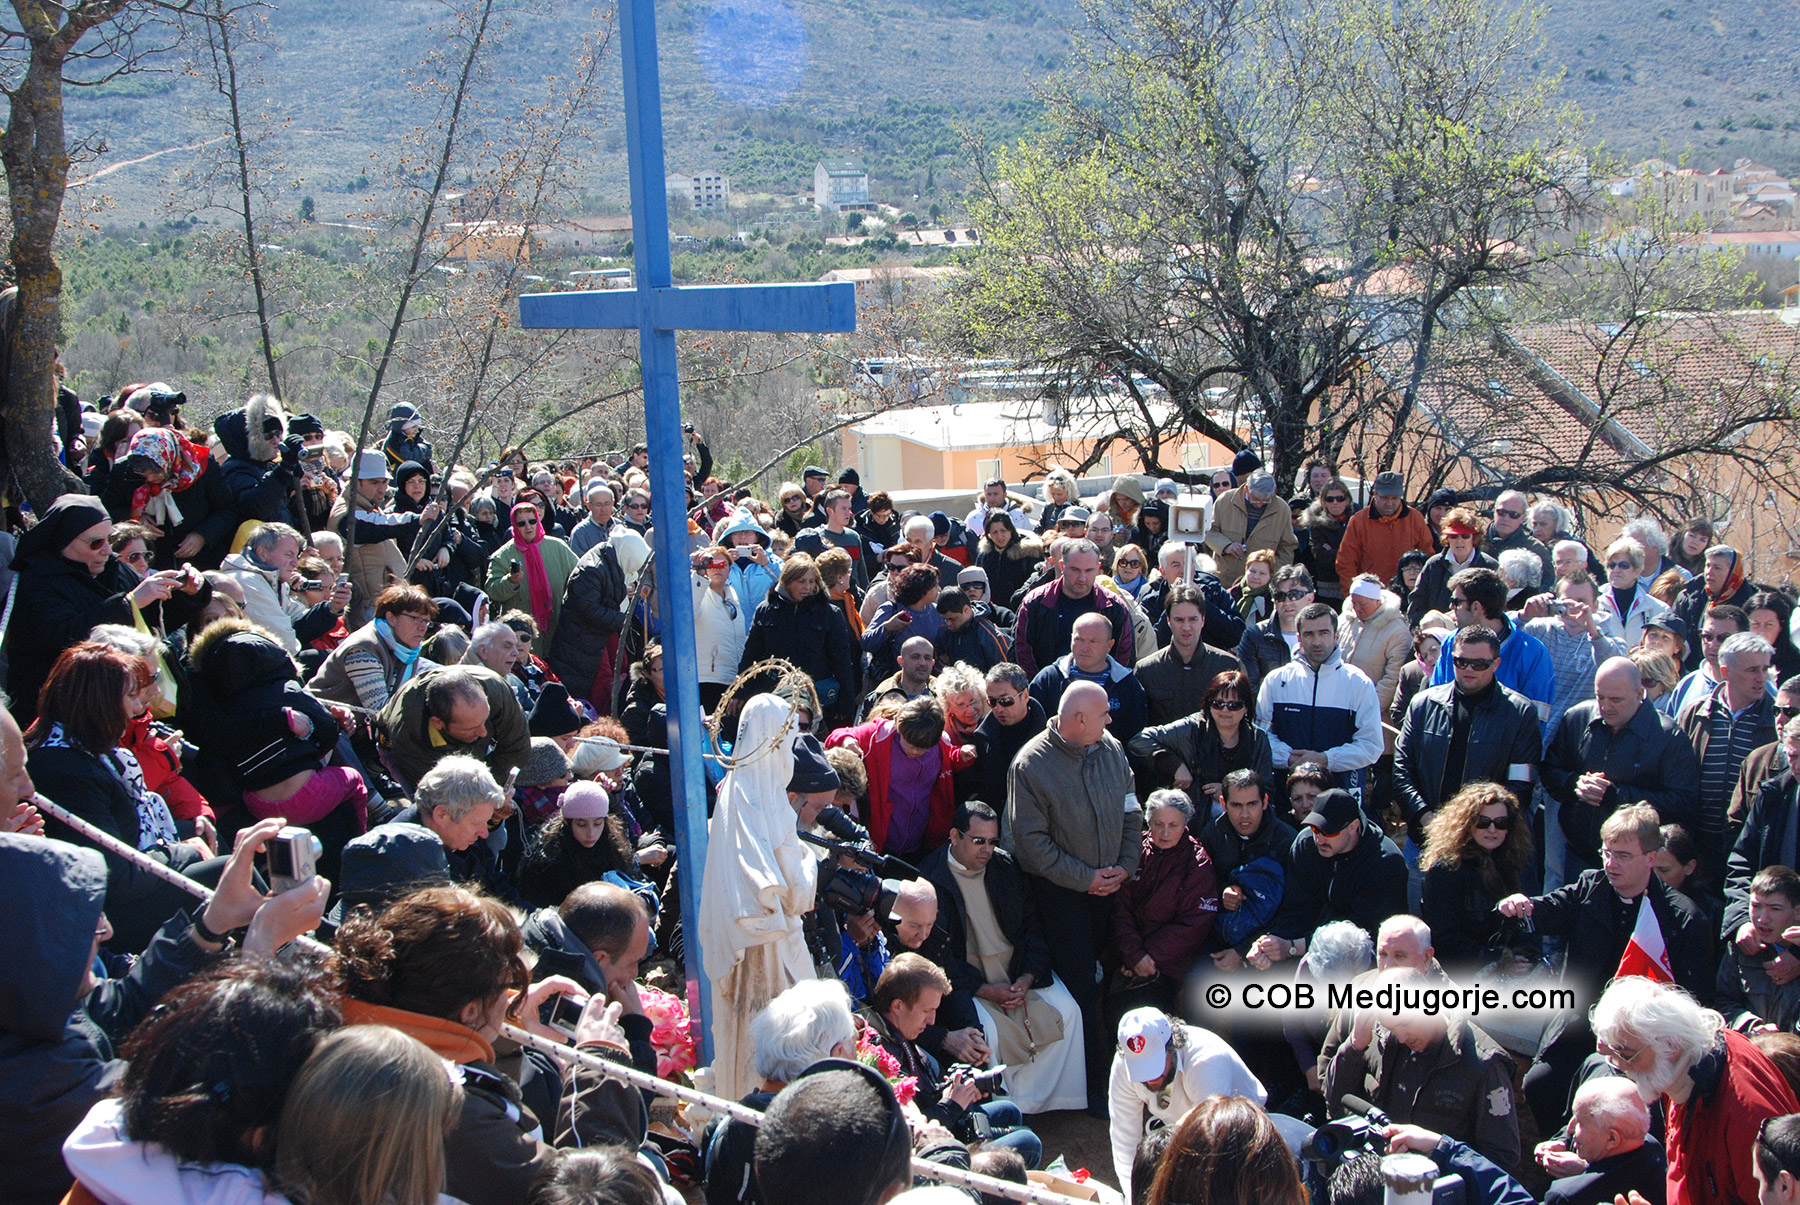 crowd of pilgrims await Our Lady's words in Medjugorje